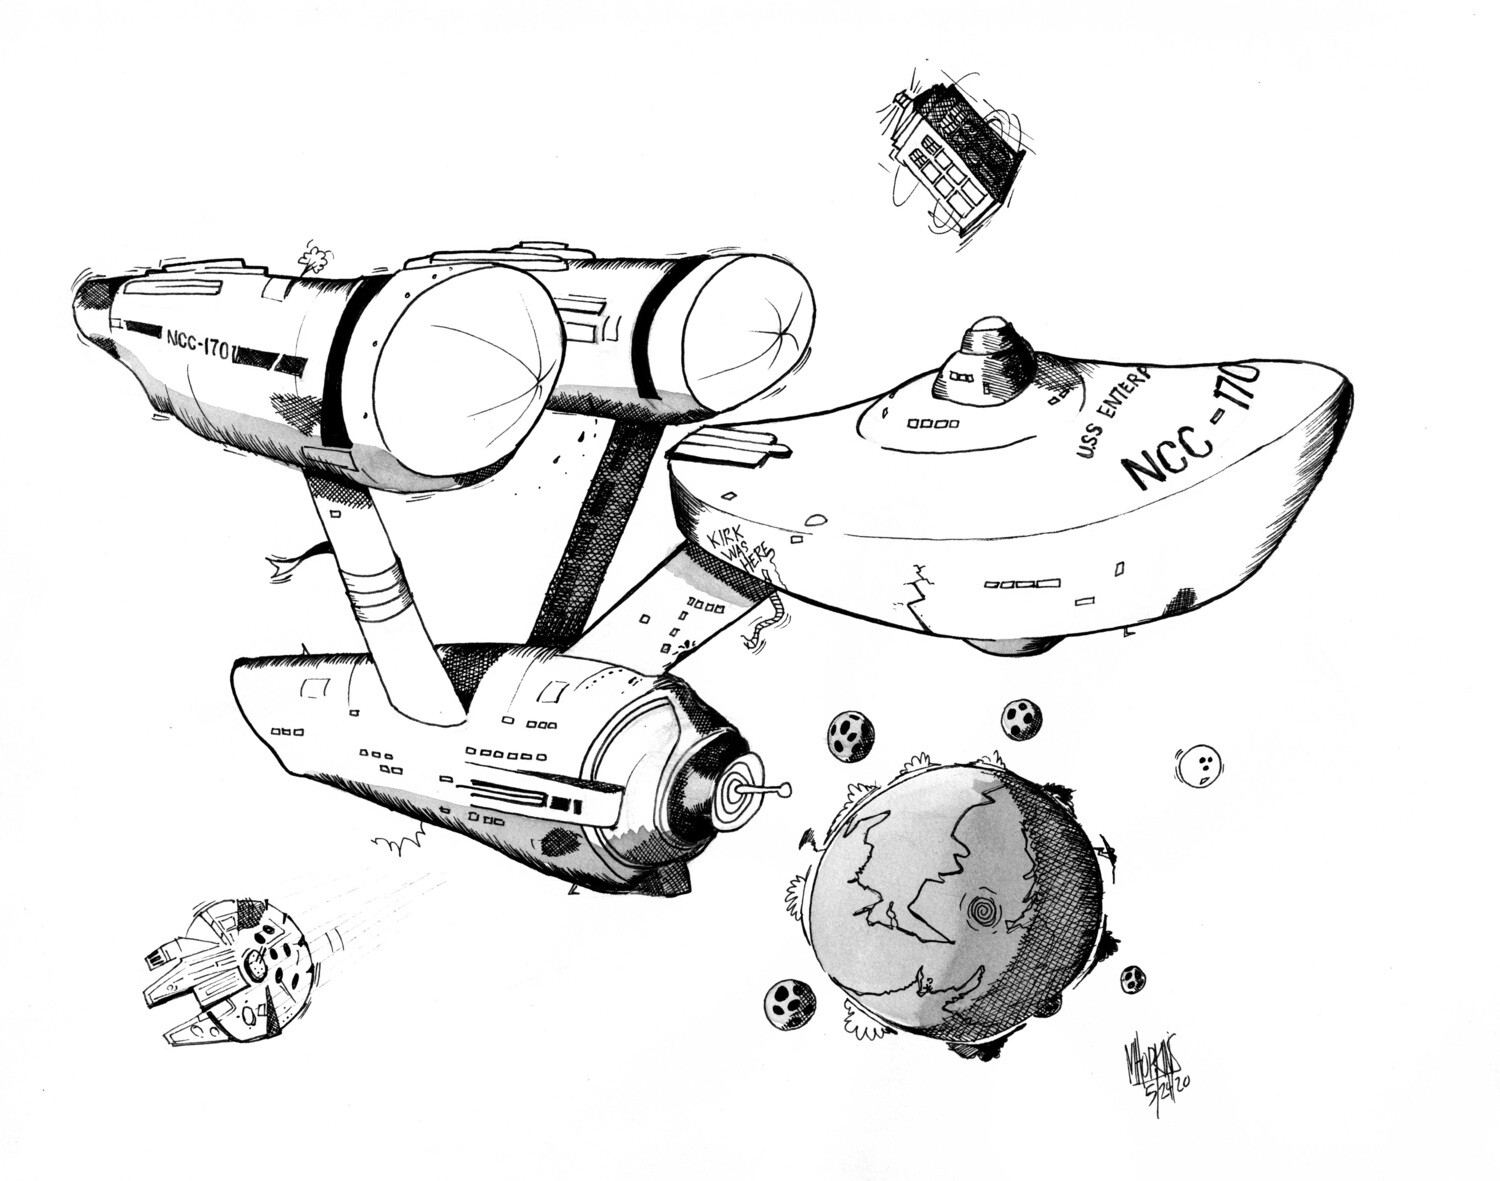 USS Enterprise - Caricature Limited Edition Signed Giclée Prints from $50 to $200